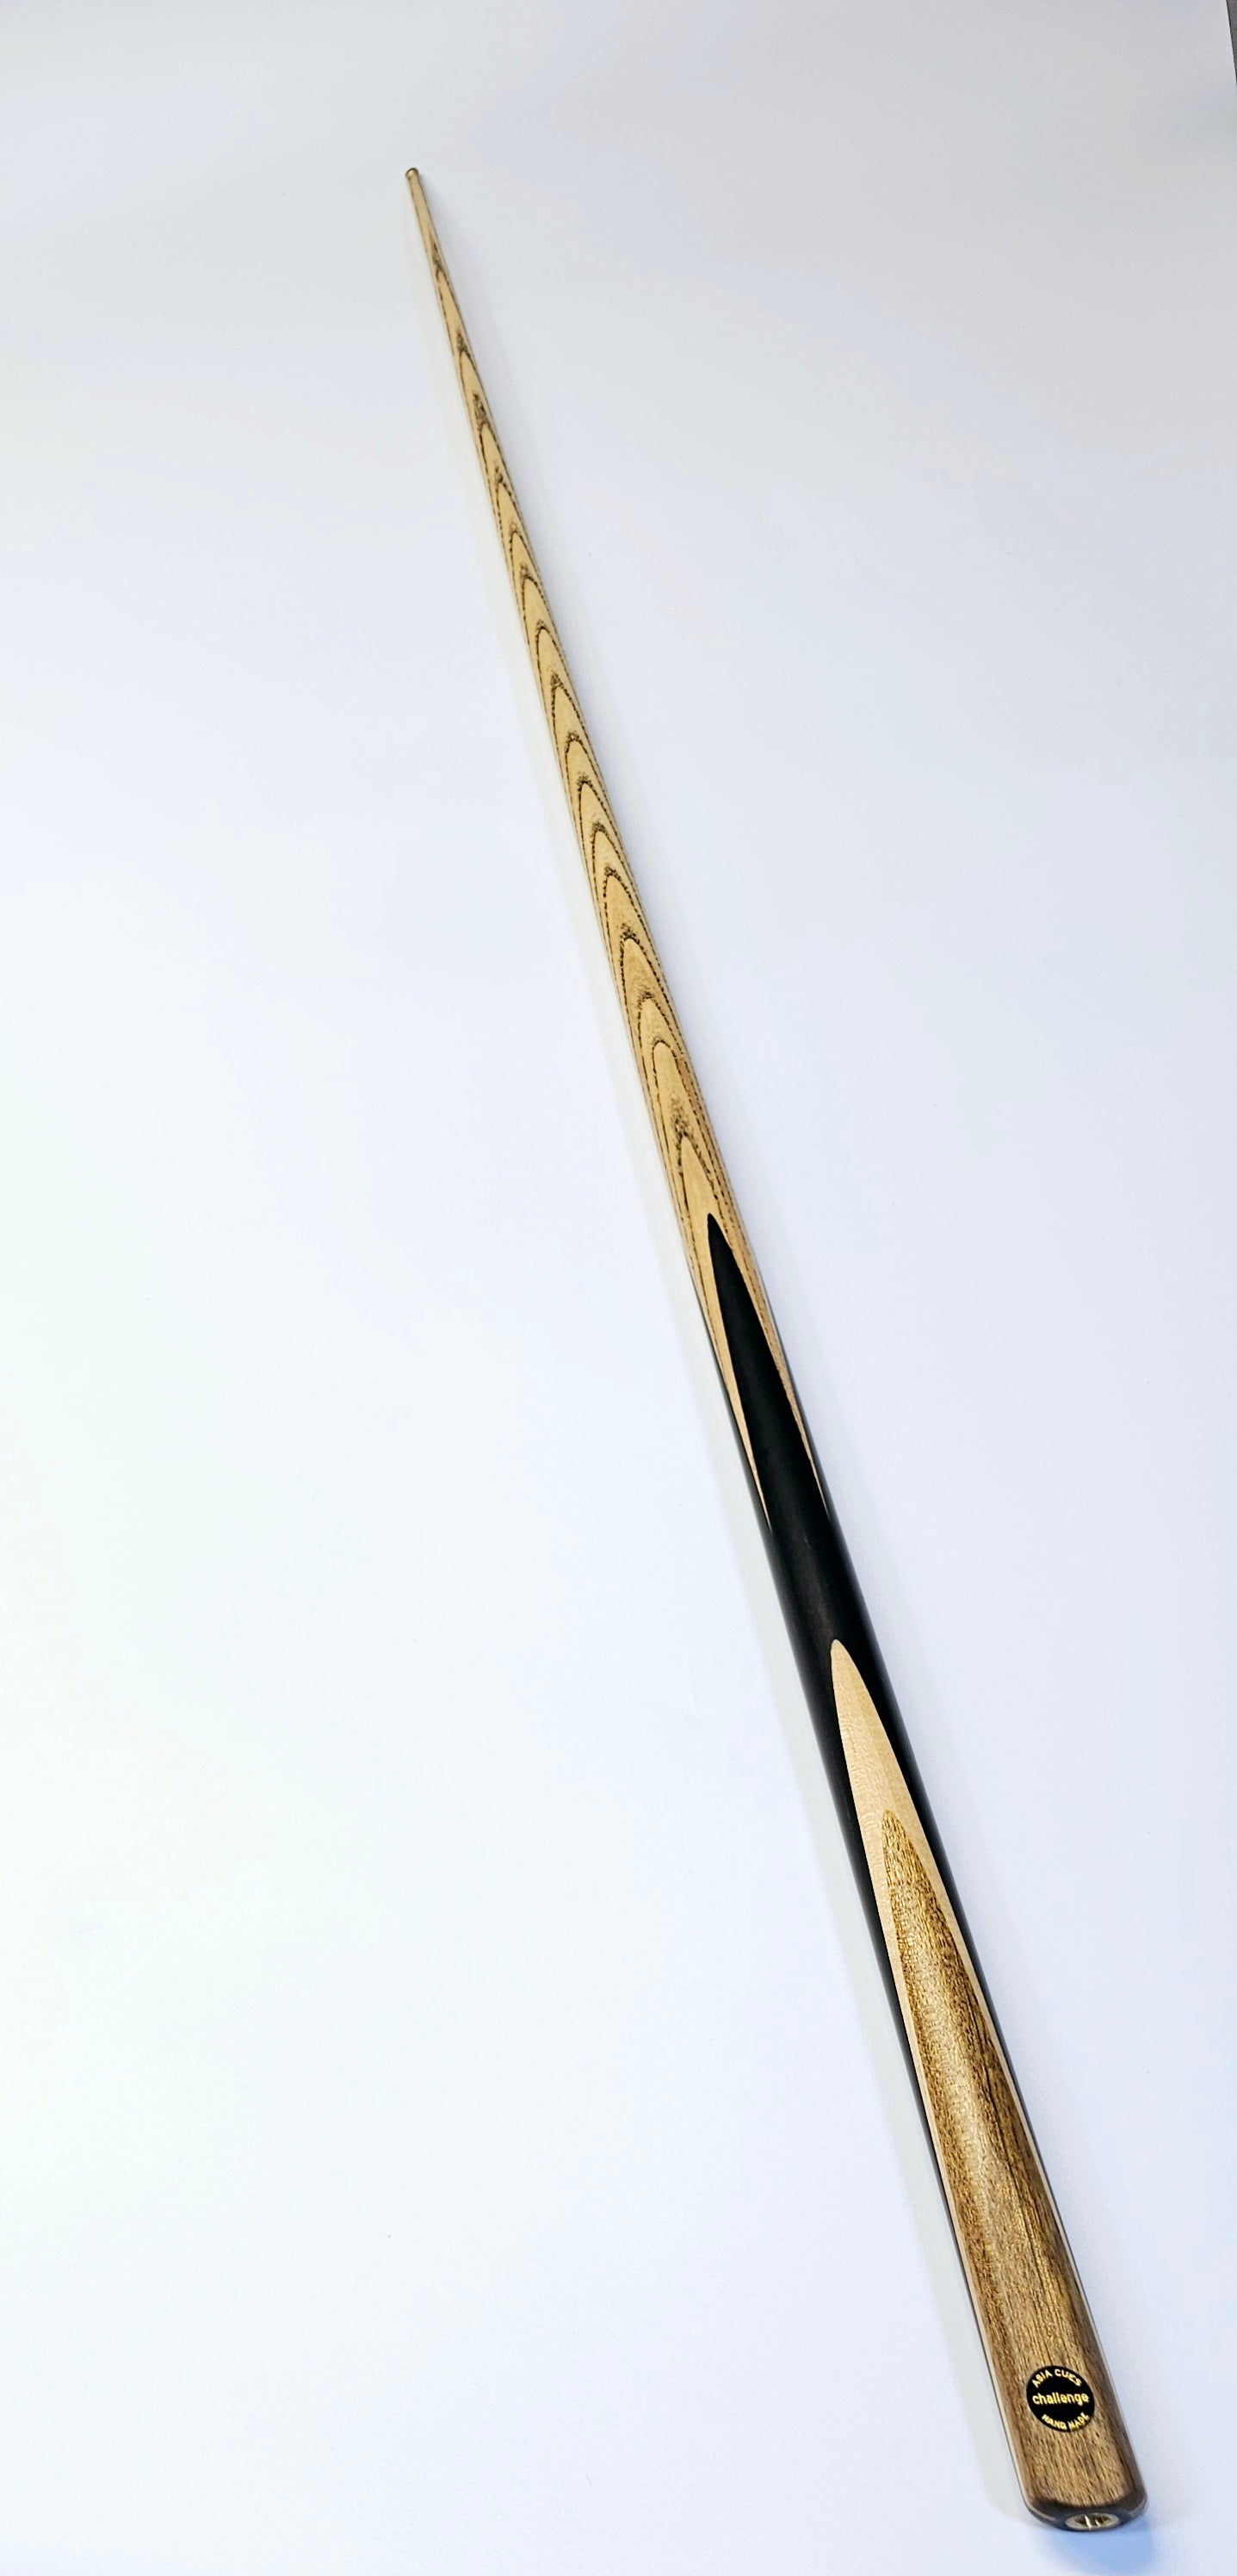 Asia Cues Challenge - One Piece Snooker Cue 9.7mm Tip, 19.2oz, 59"